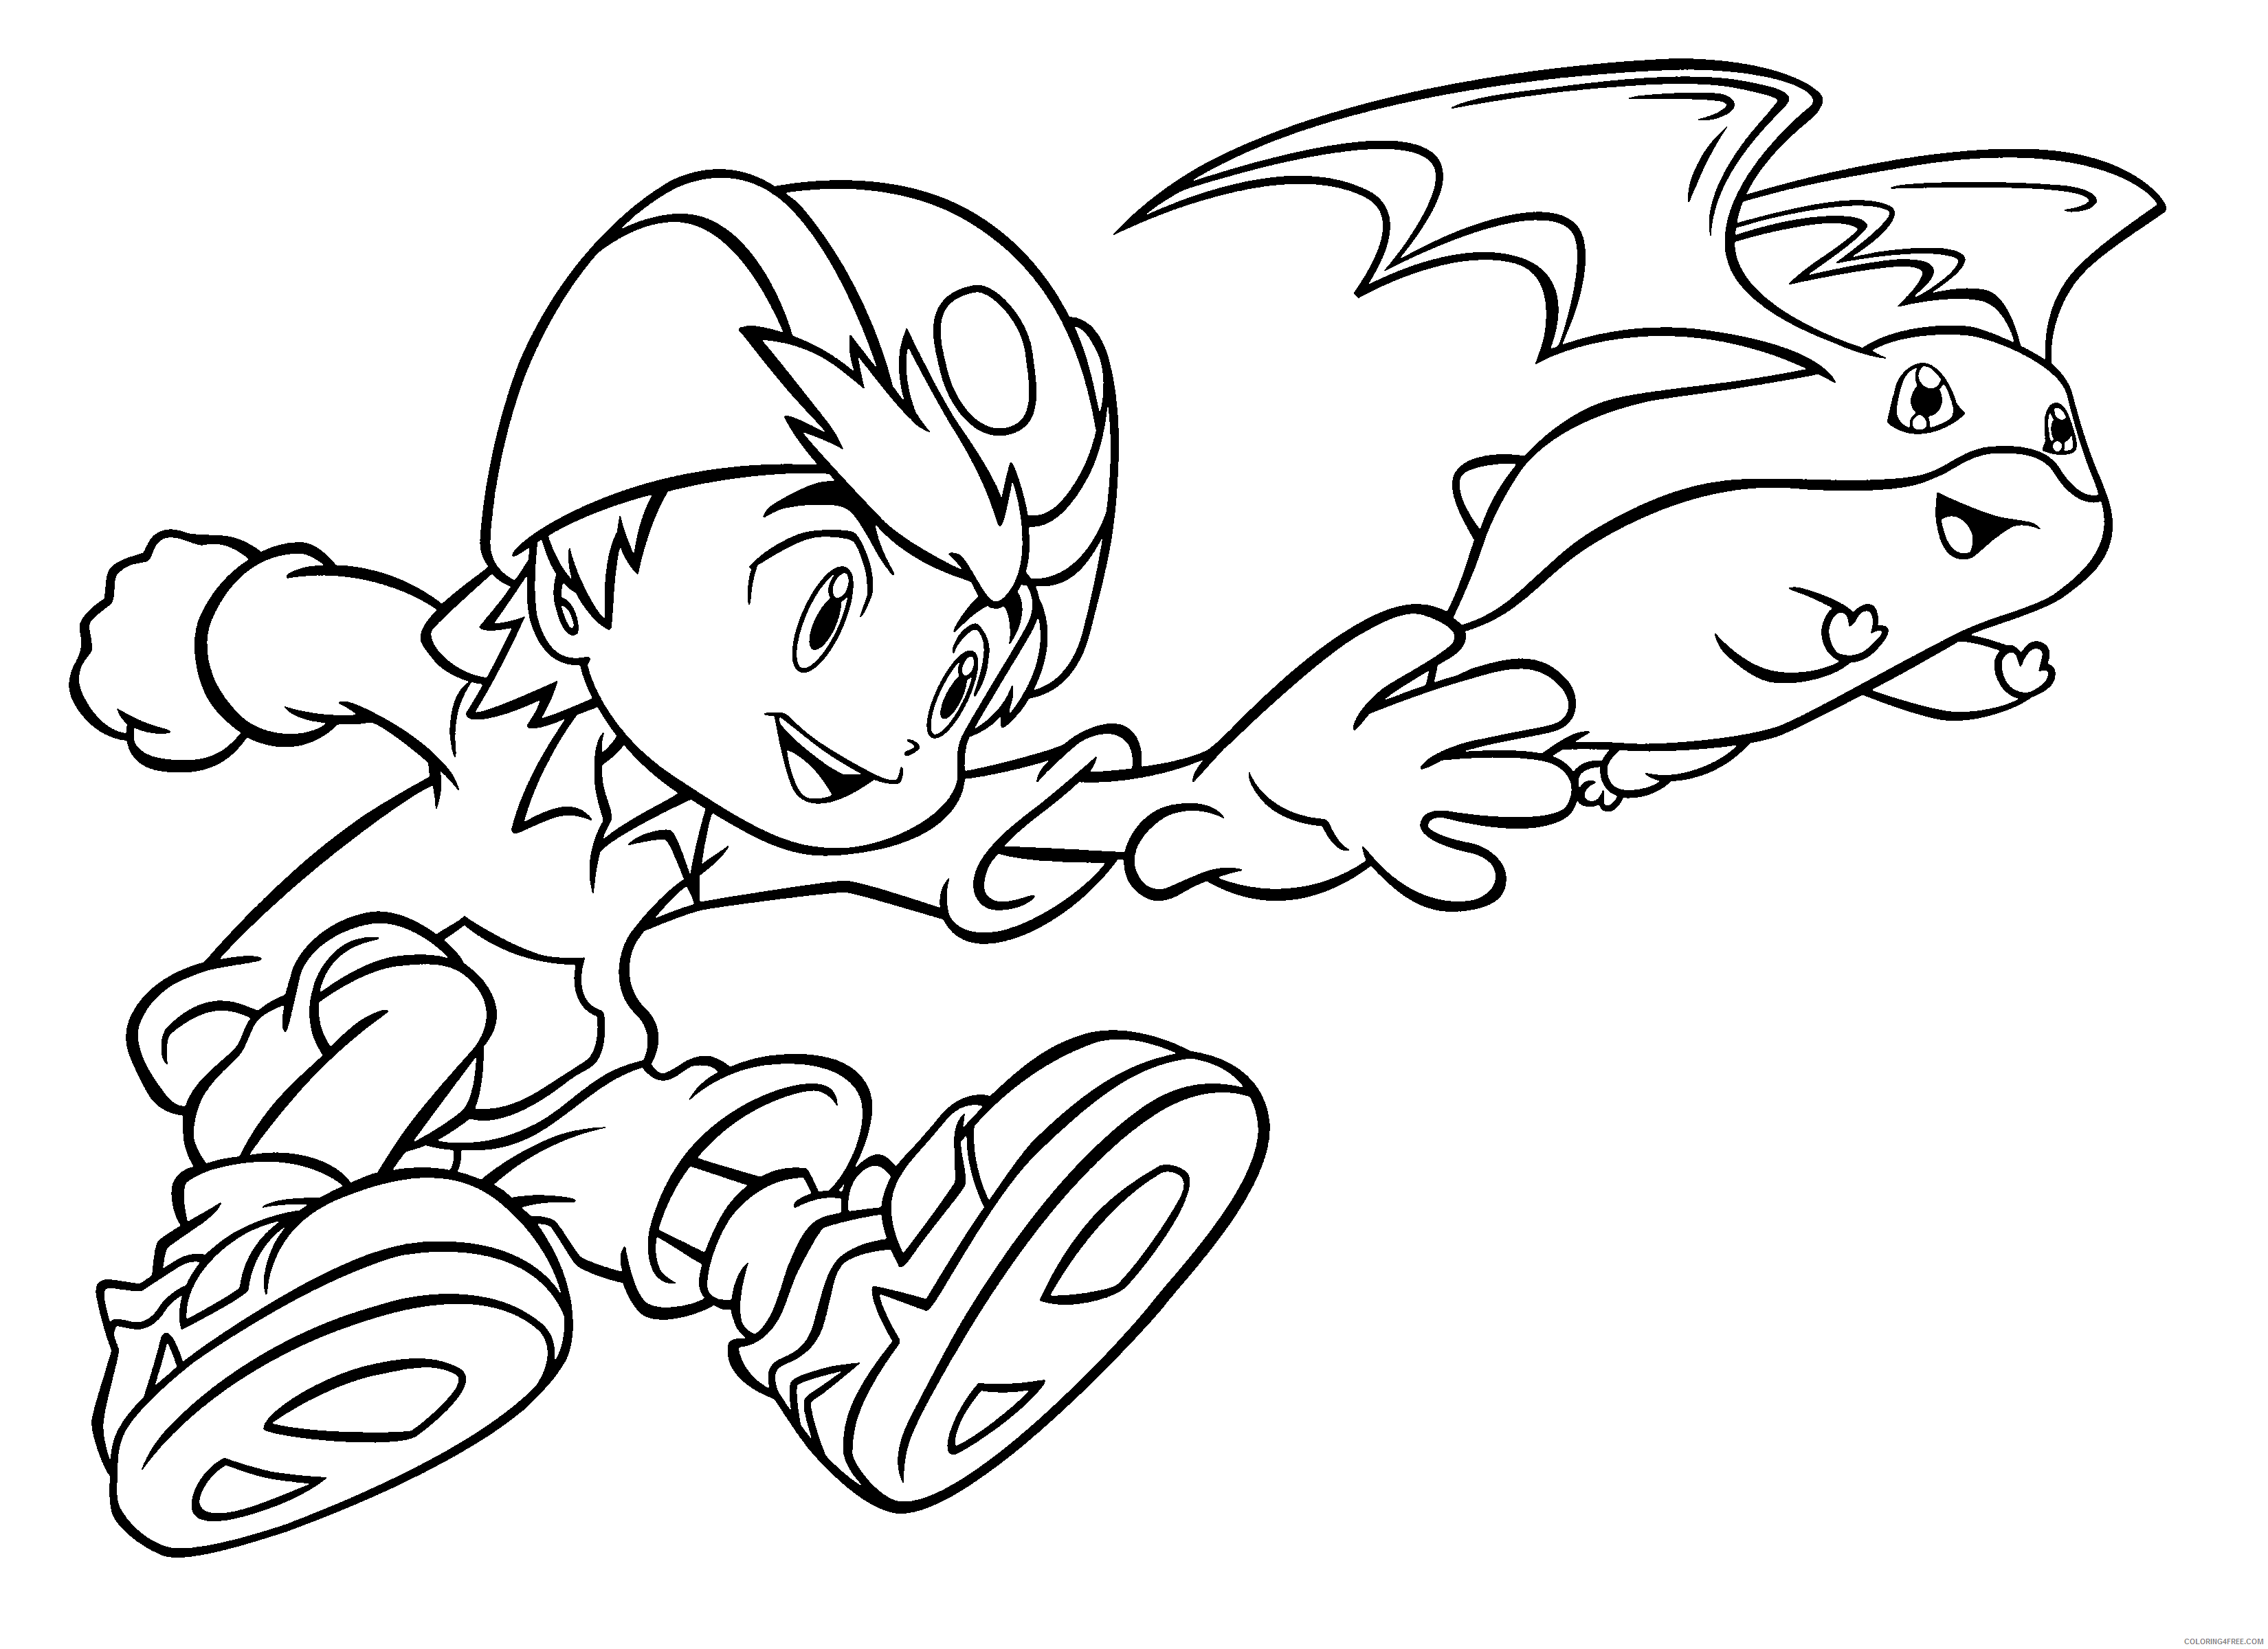 Digimon Printable Coloring Pages Anime digimon 196 2021 0283 Coloring4free